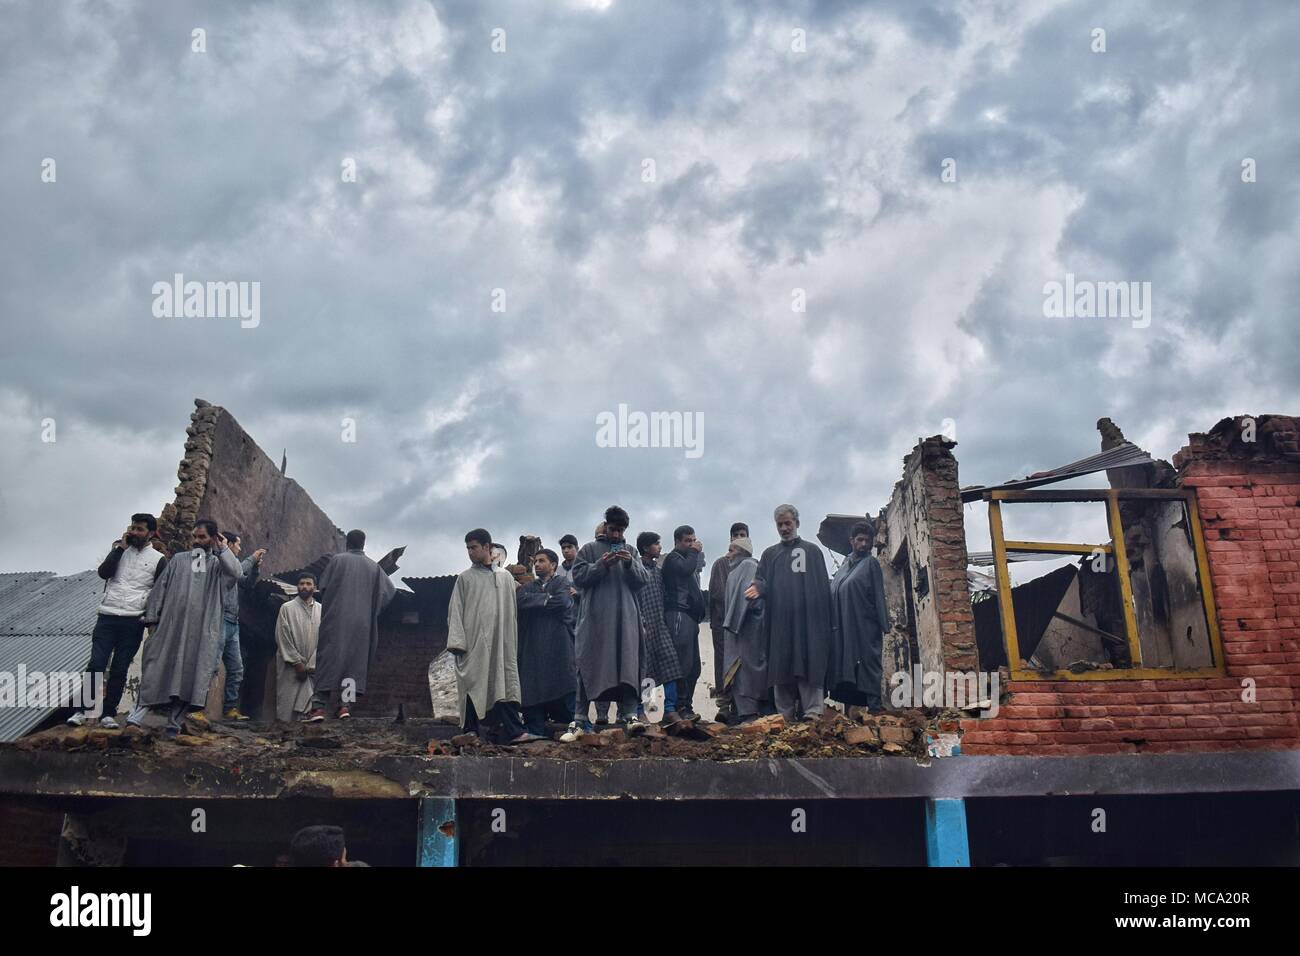 Locals gather near debris of Houses that were destroyed in a Gunbattle between forces and pro-freedom rebels in Khudwani area of South Kashmir's district Kulgam on 11 April 2018. Four Civilians and 1 army man were killed and about 150 civilians were injured in clashes while 3 Rebels escaped by taking advantage of huge crowd assembled near encounter site Stock Photo